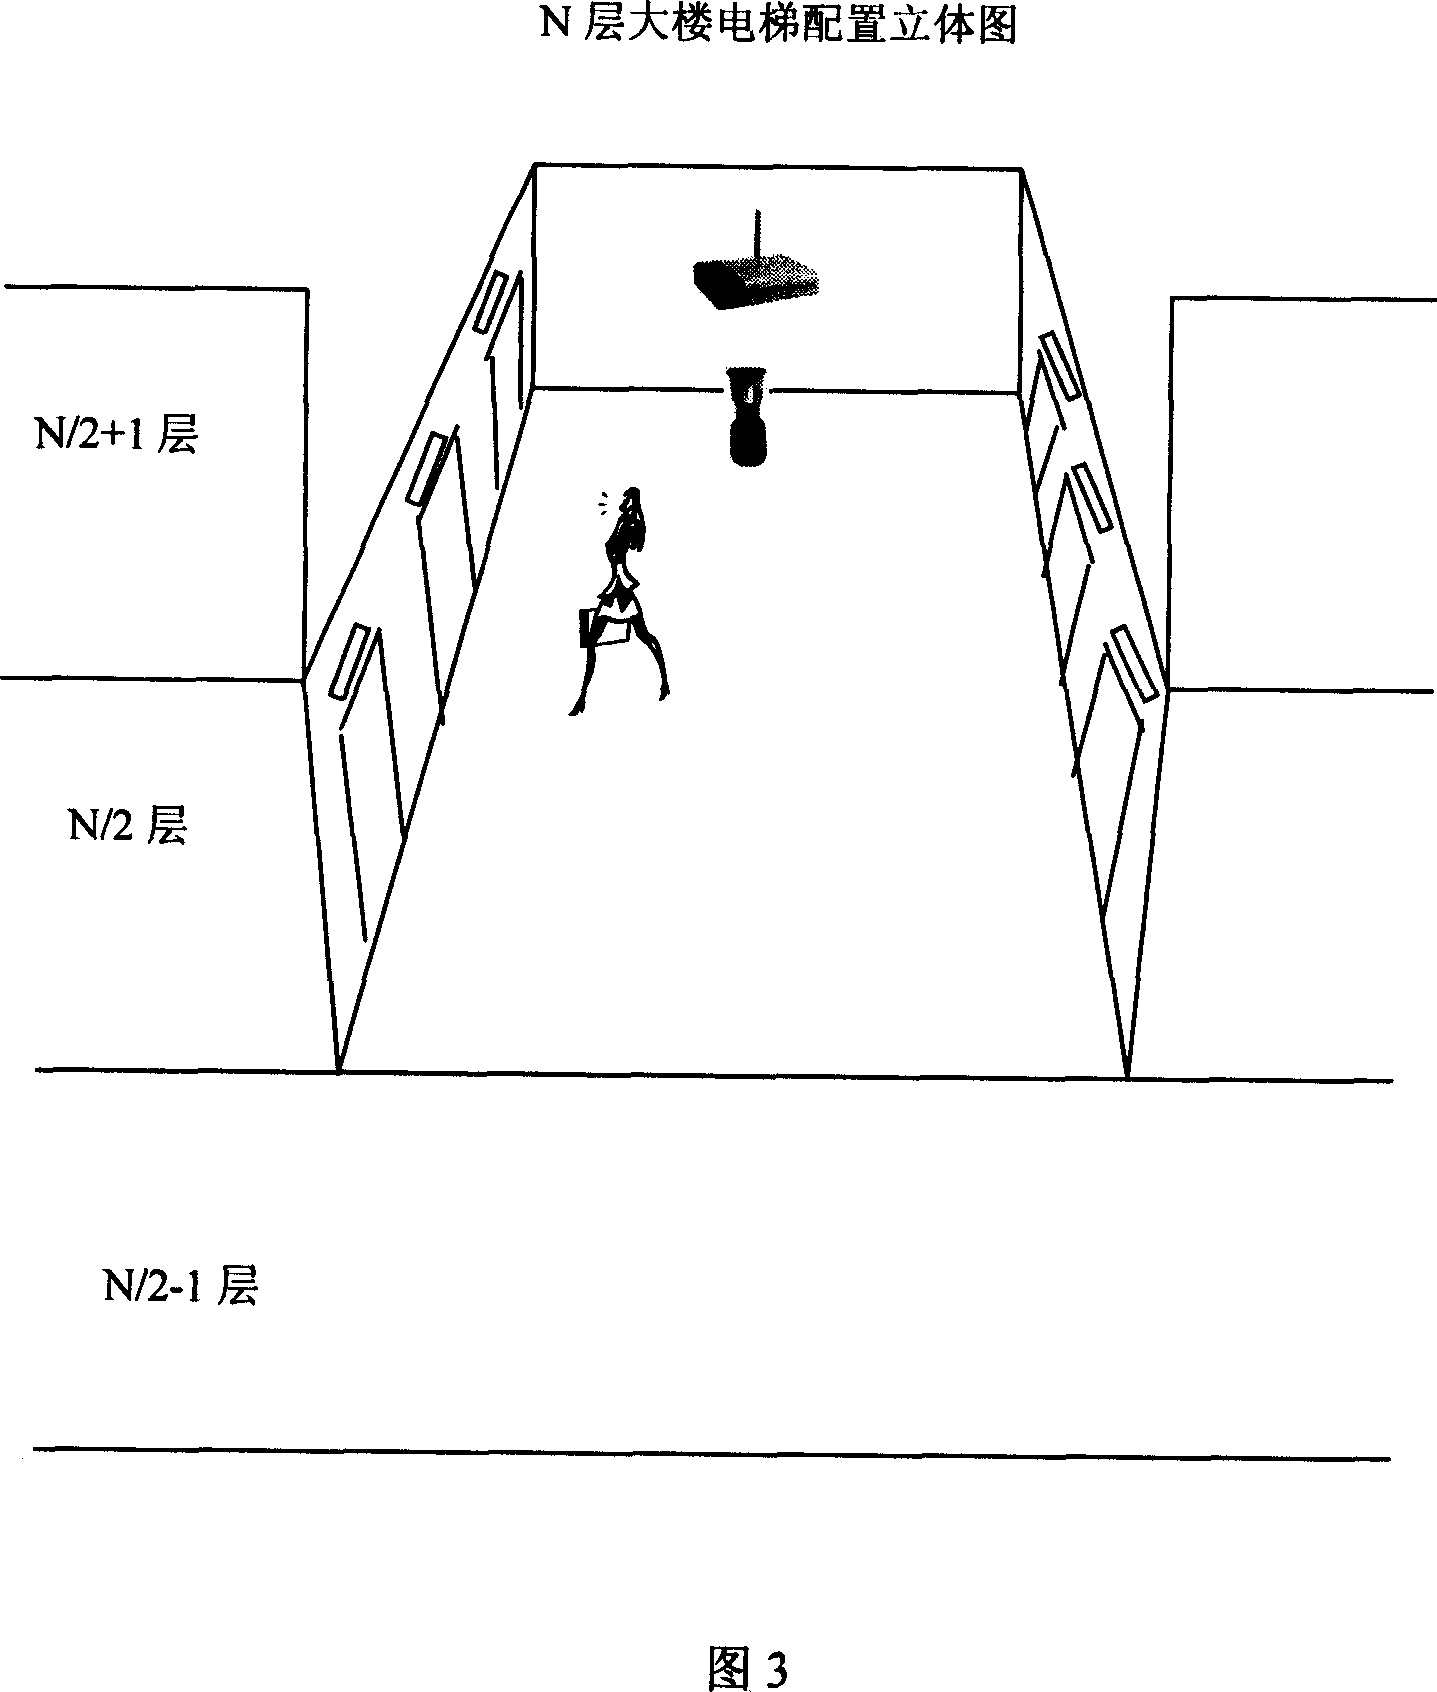 Elevator safety apparatus based on image recognition technique